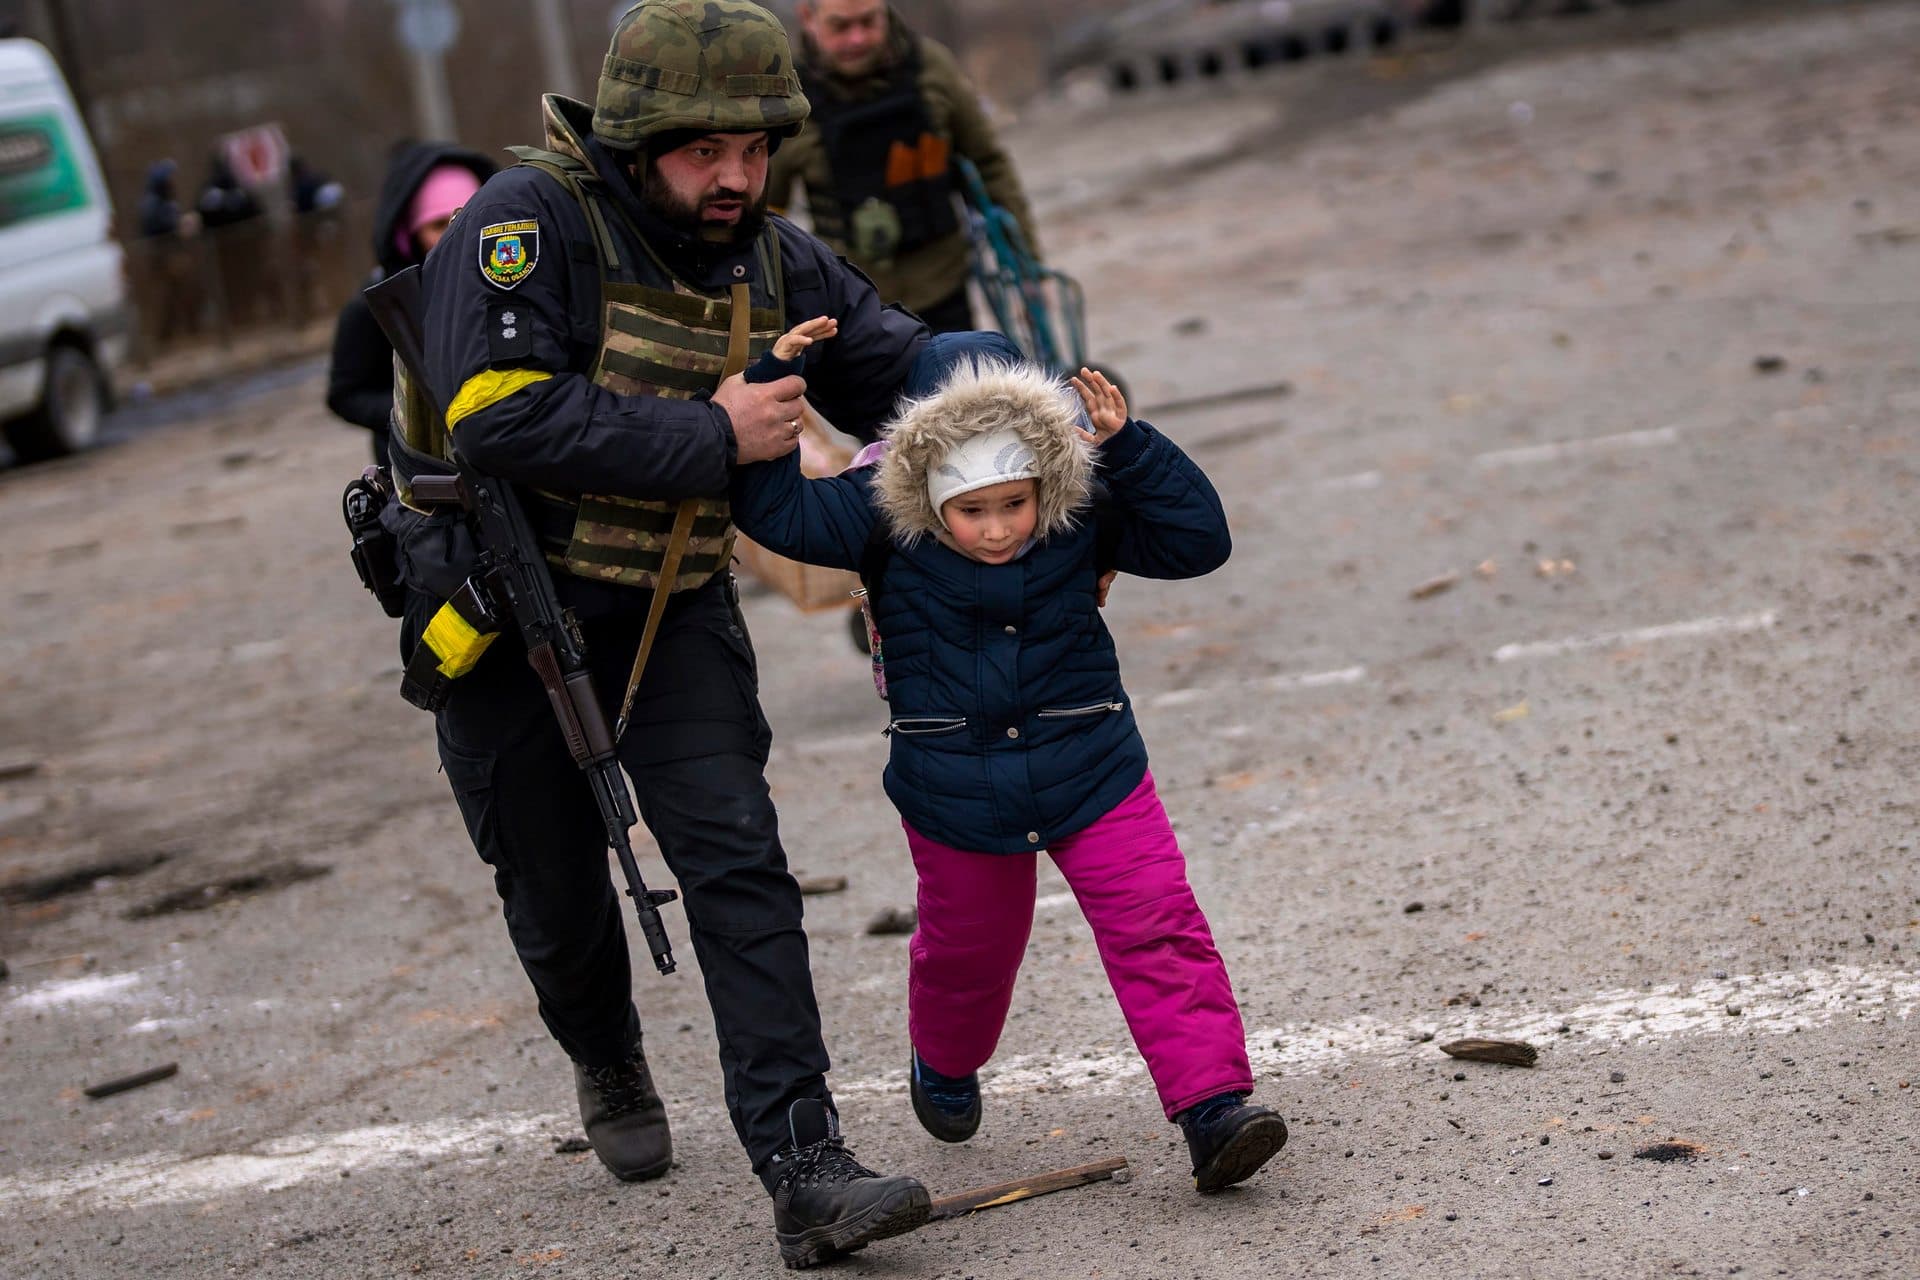 A Ukrainian police officer runs while holding a child as the artillery echoes nearby, while fleeing Irpin